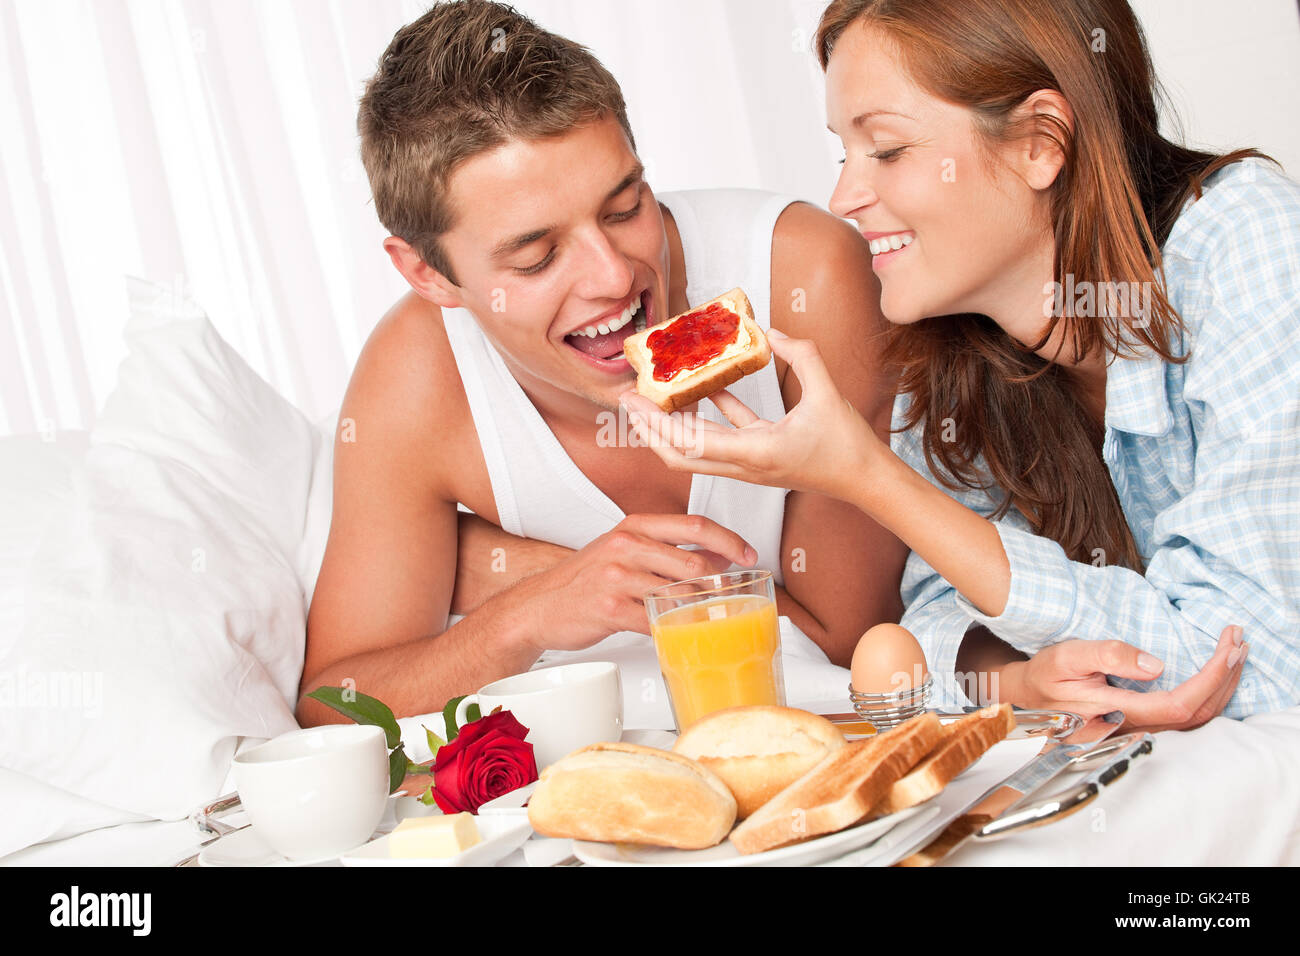 bed delighted unambitious Stock Photo